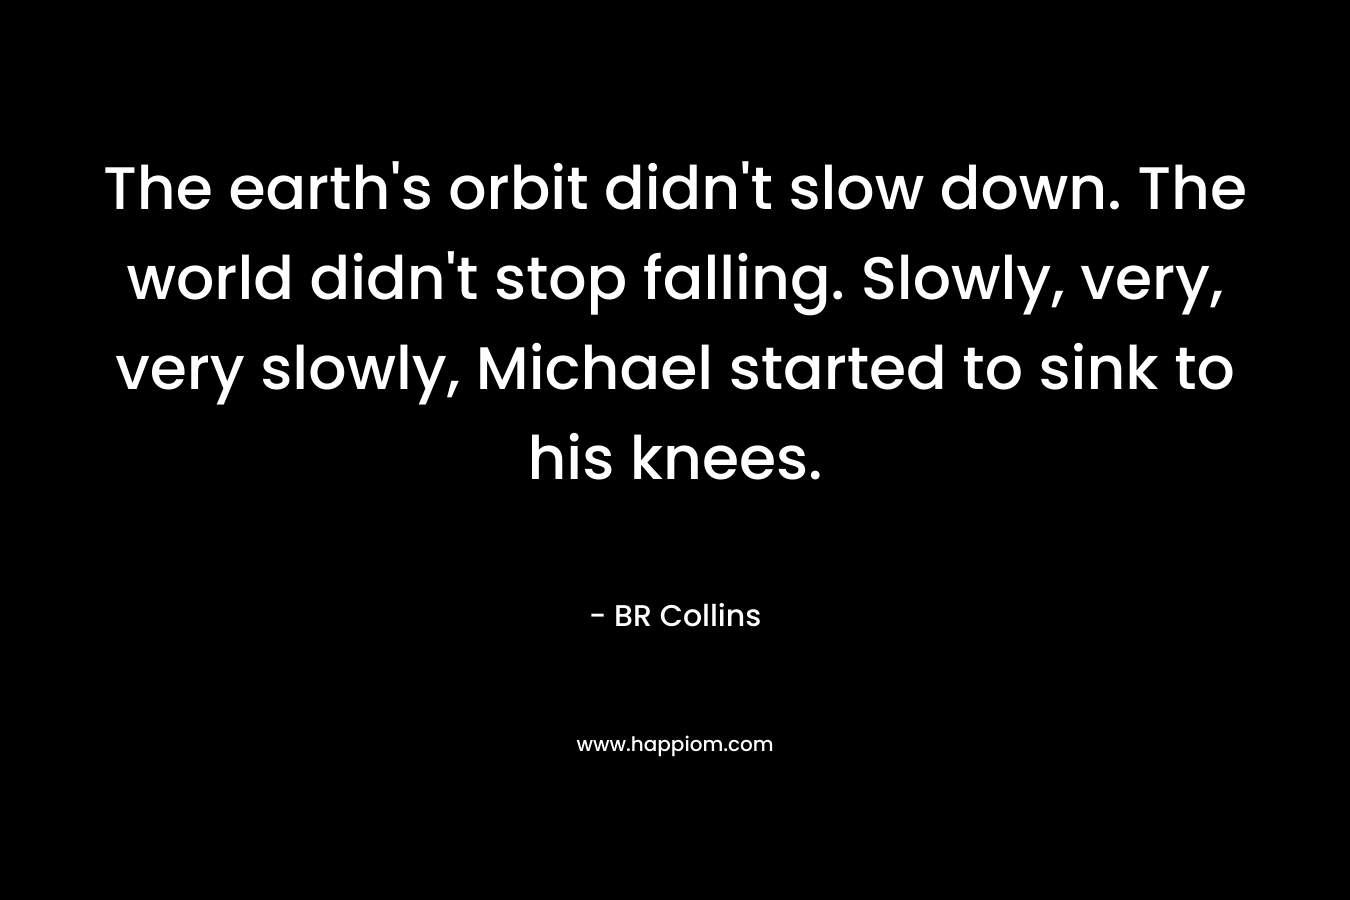 The earth’s orbit didn’t slow down. The world didn’t stop falling. Slowly, very, very slowly, Michael started to sink to his knees. – BR Collins